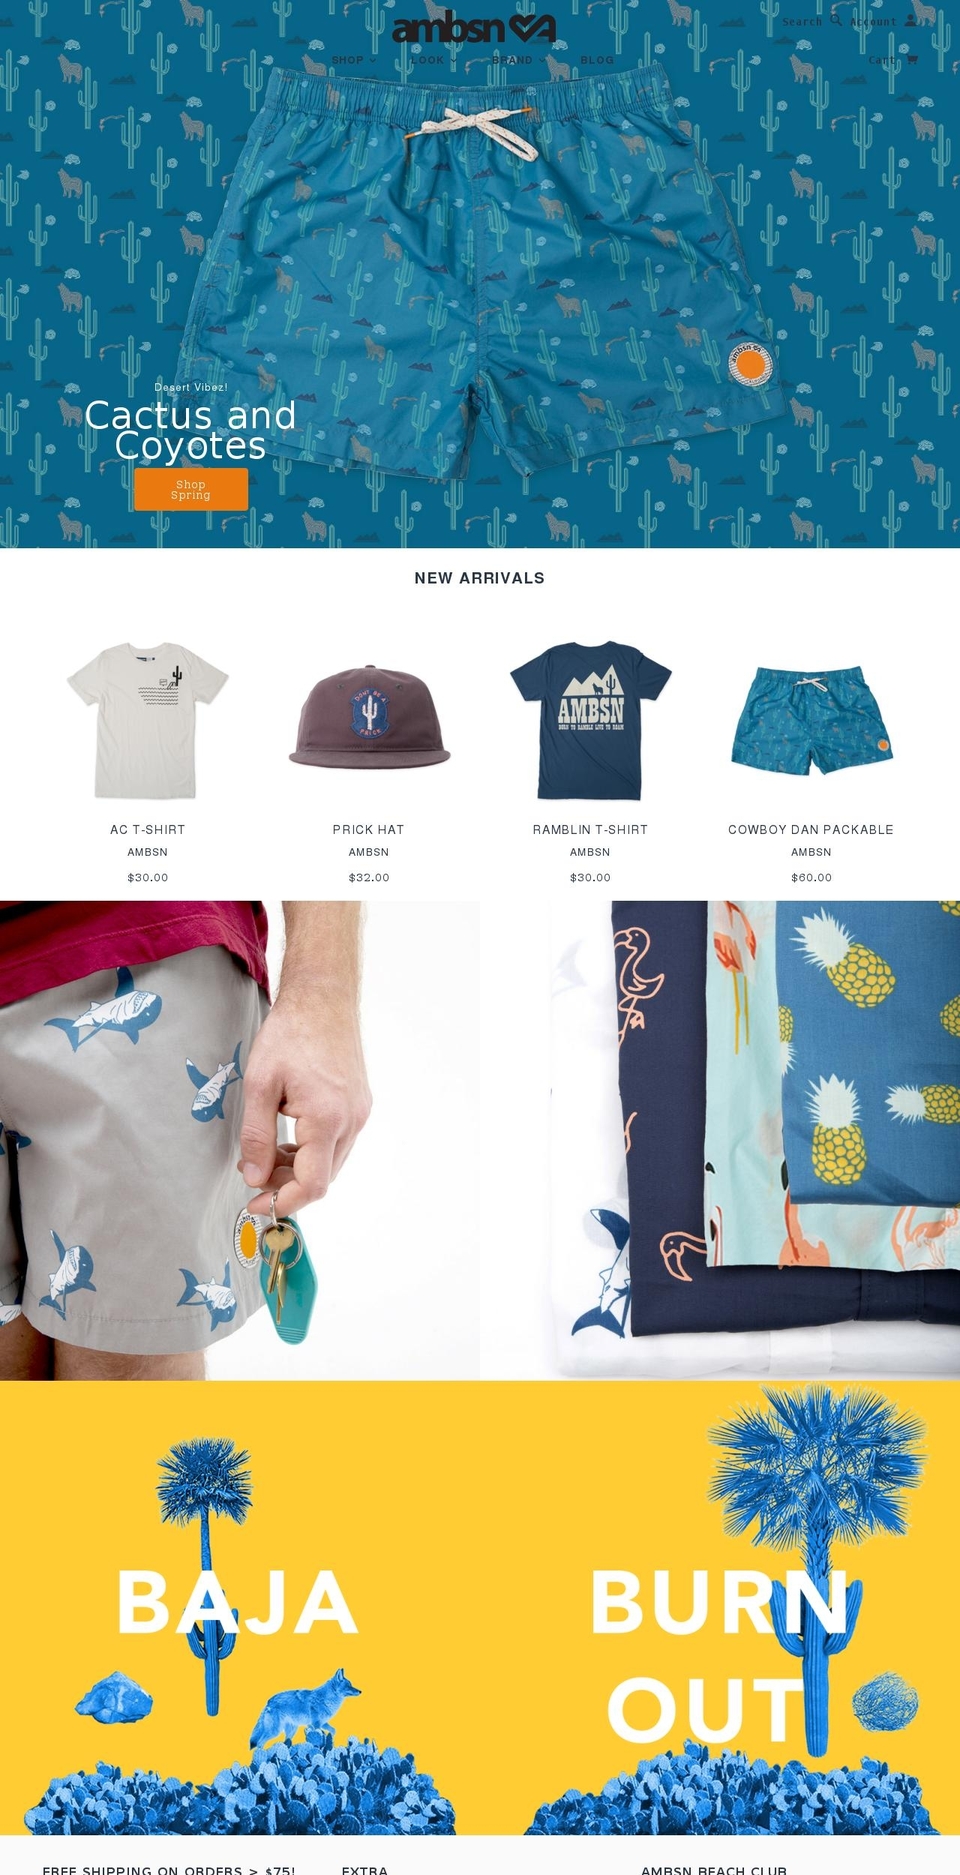 Emerge Shopify theme site example ambsn.com